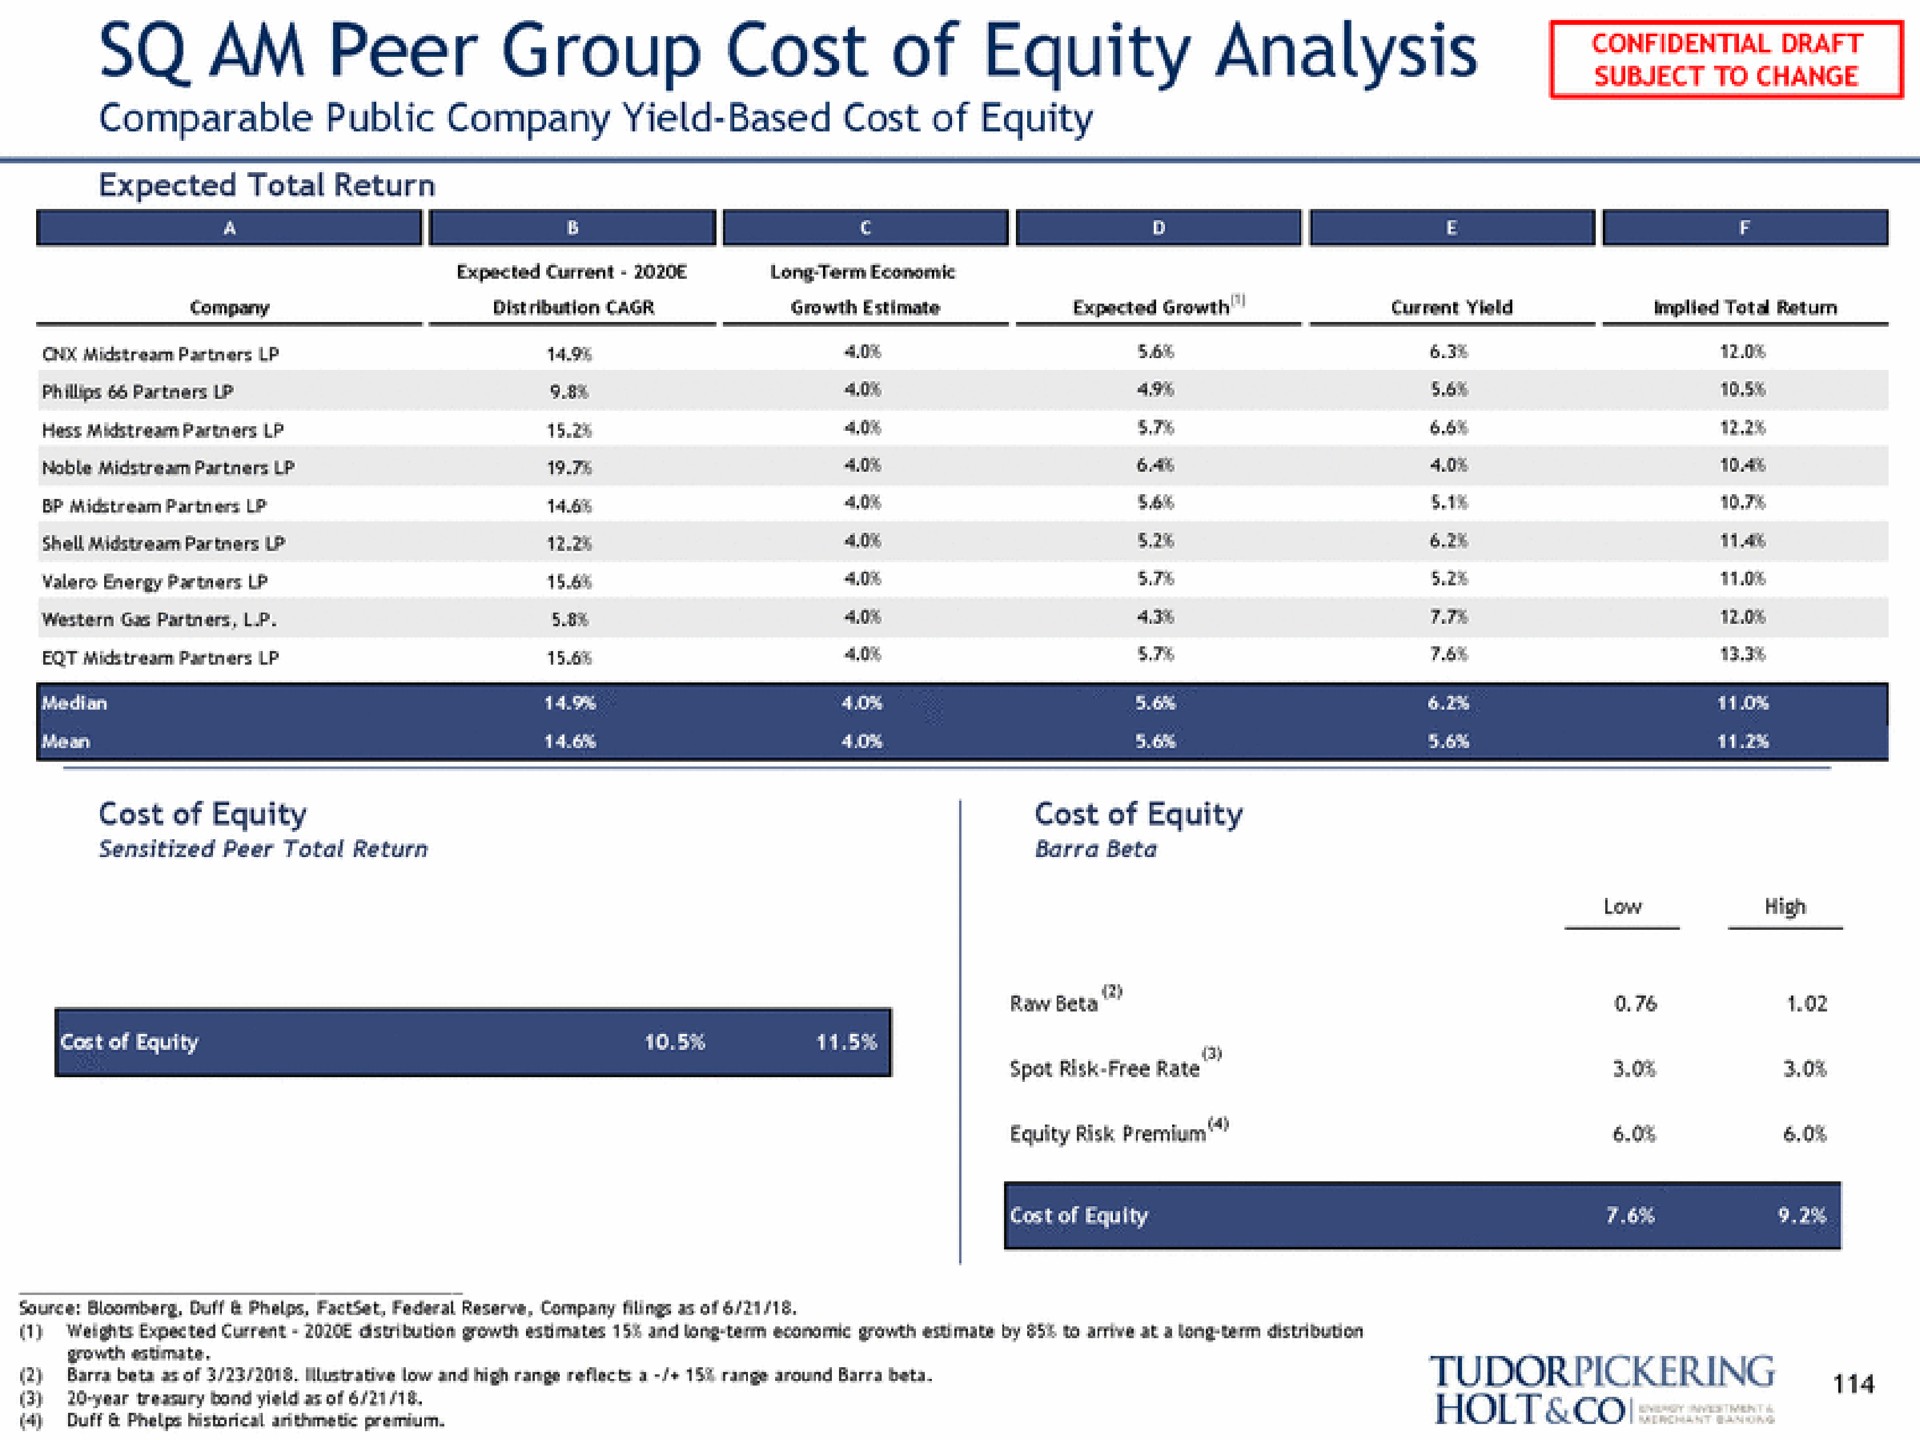 am peer group cost of equity analysis omer a | Tudor, Pickering, Holt & Co